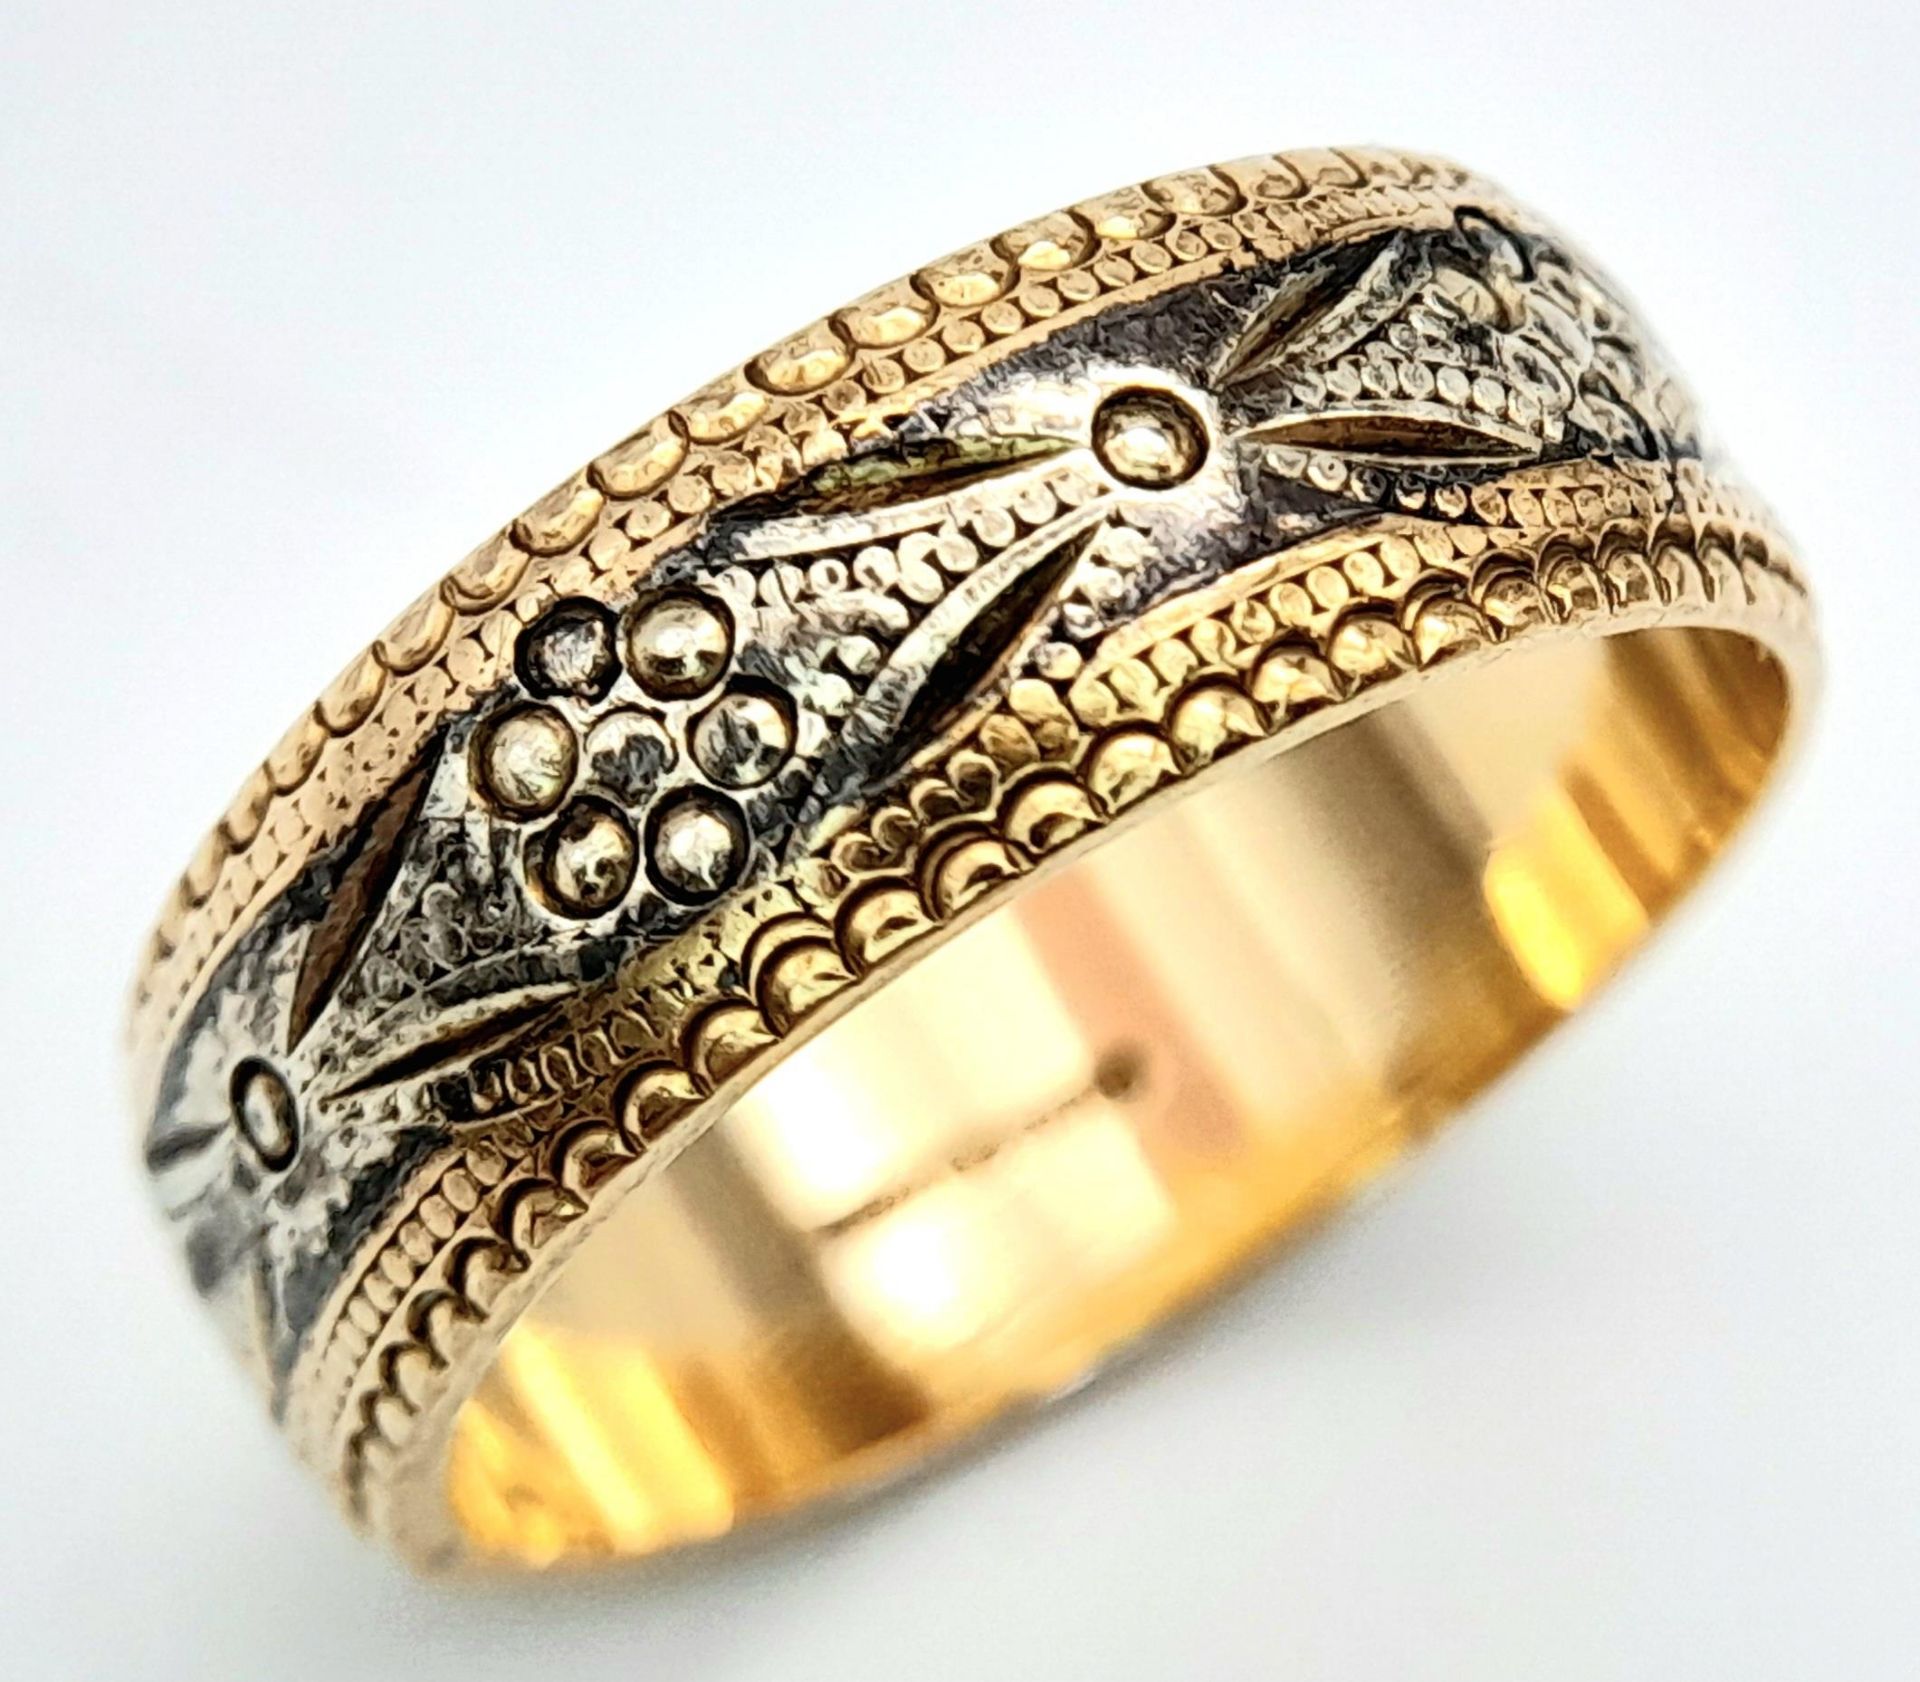 A 9K Yellow and White Decorative Band Ring. 6mm width. Size J. 2.75g